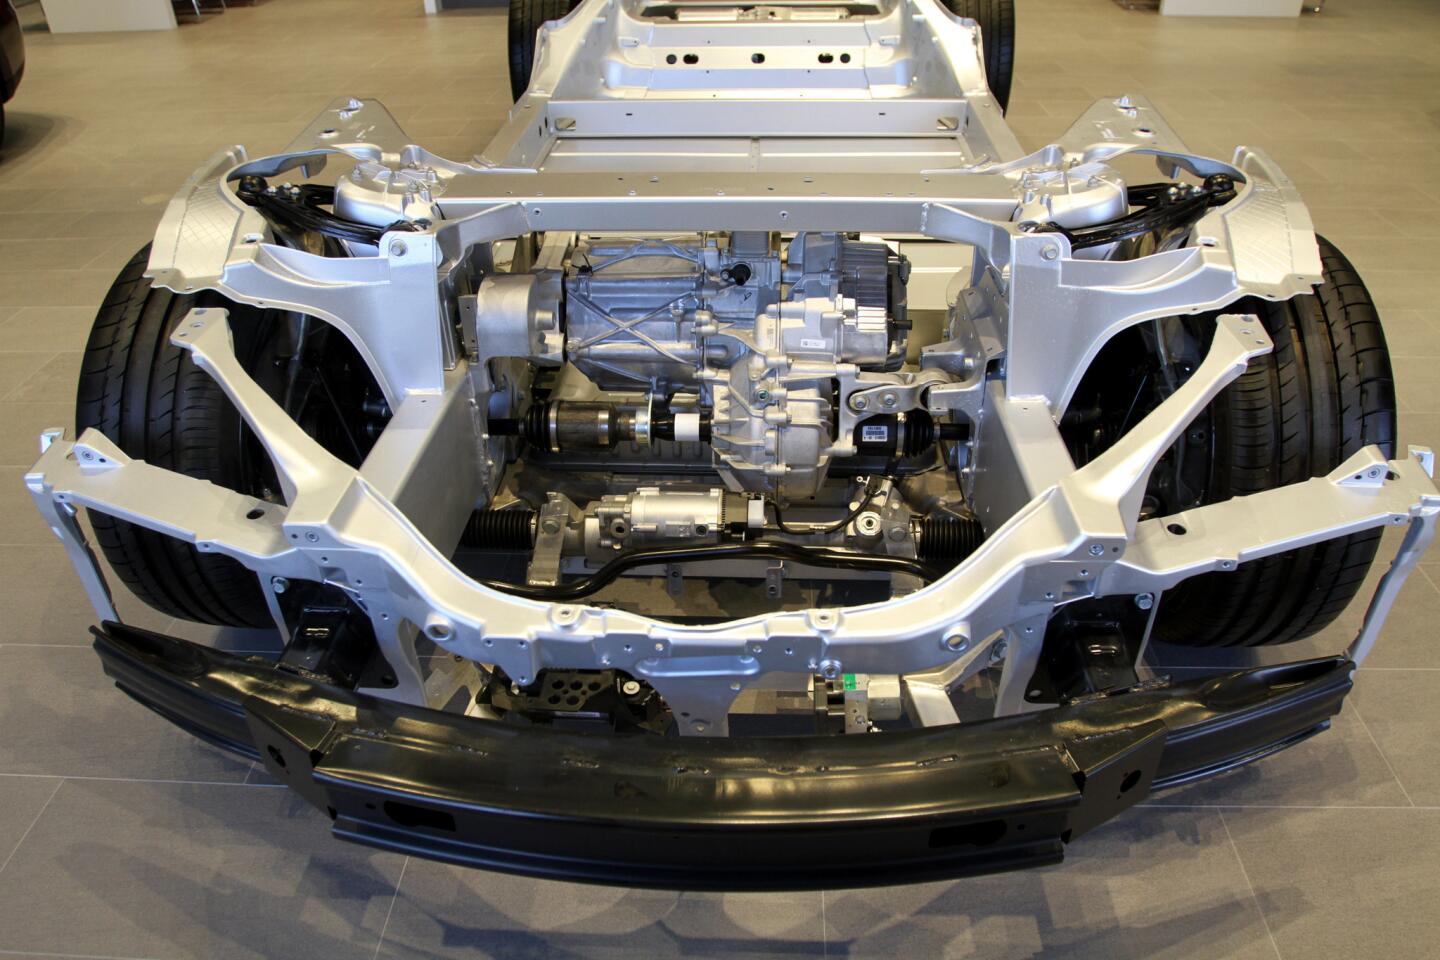 The frame and inner workings of the electric vehicles can be seen at the new Tesla Motors show room and service center which opened today, on San Fernando Rd. in Burbank on Friday, October 23, 2015. The showroom, where a customer can order their own personalized Tesla electric vehicle, will soon have a customer lounge and charging stations.